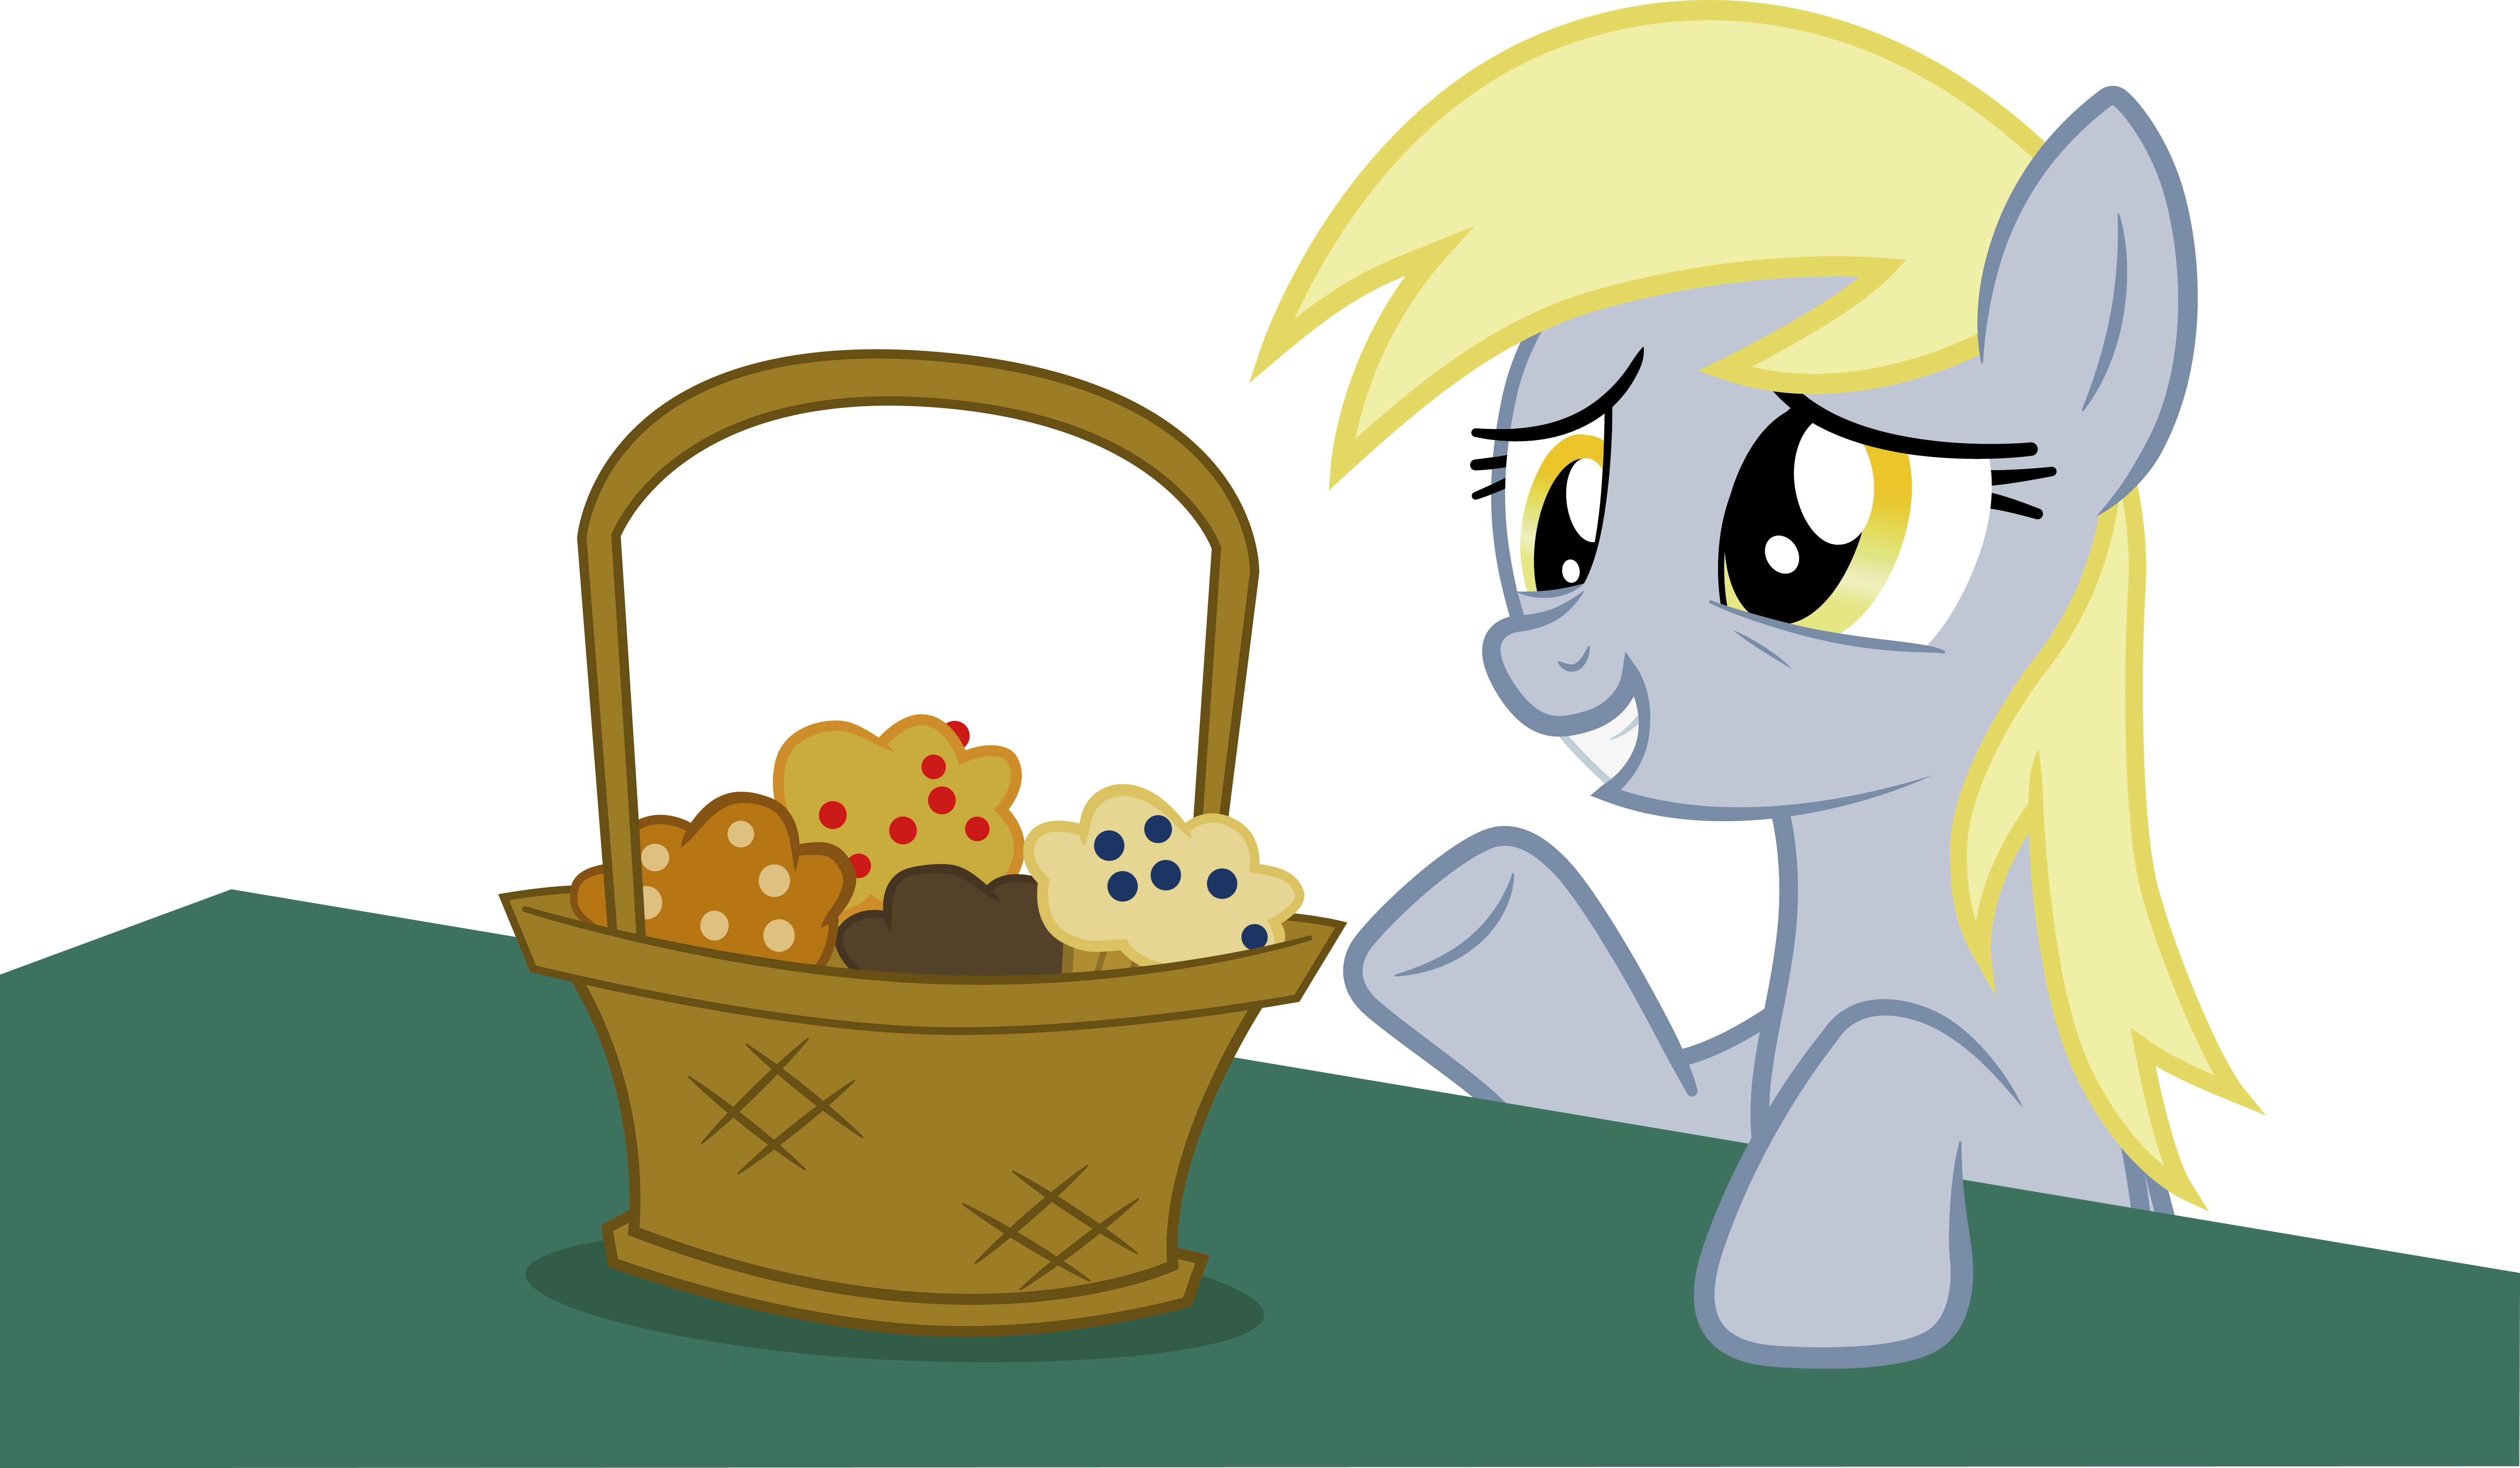 Tumblr Muffin by Wadusher0 on DeviantArt